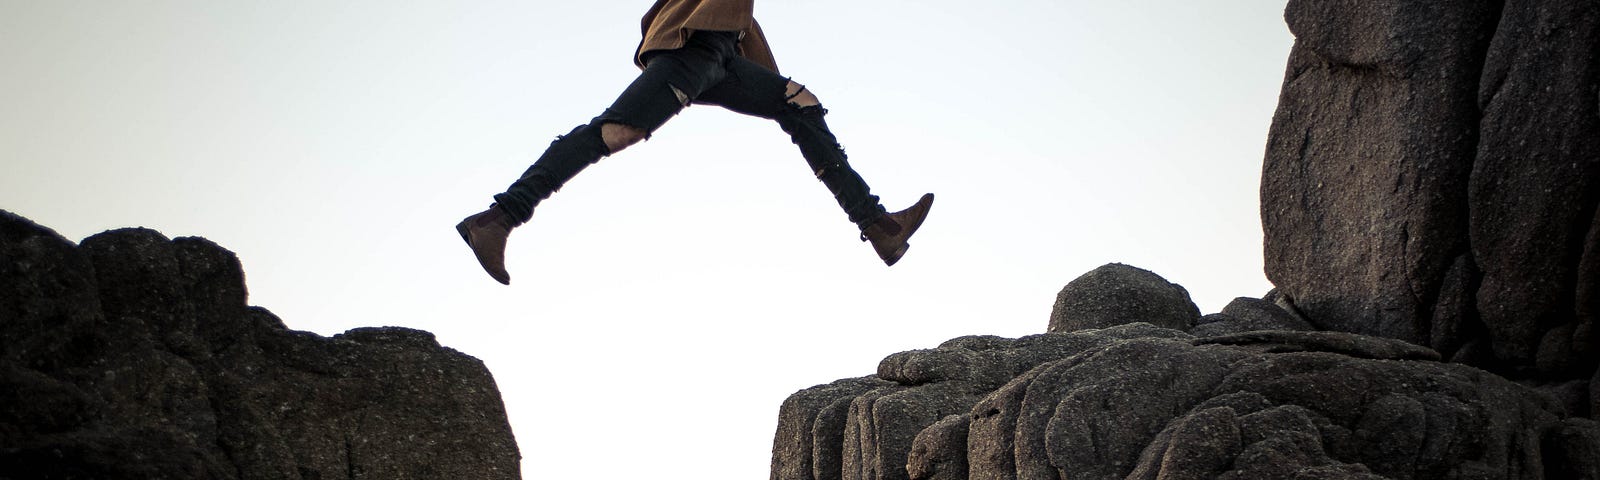 person leaping between two rocks